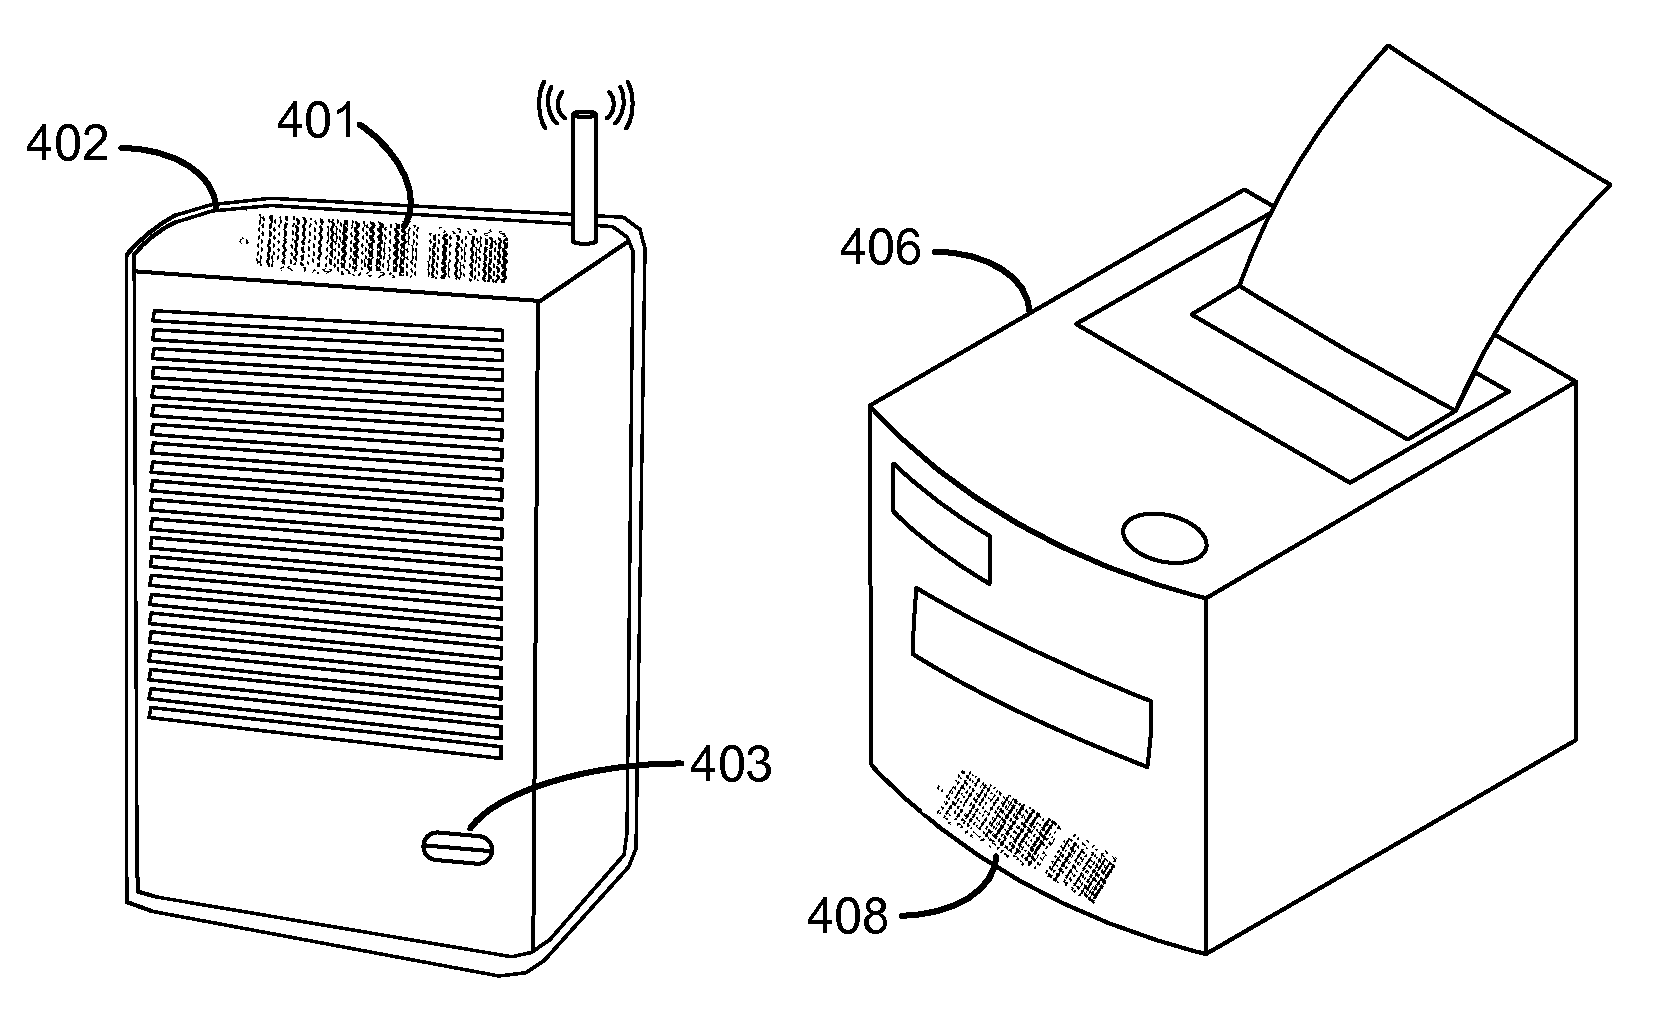 Systems and methods for wireless device connection and pairing